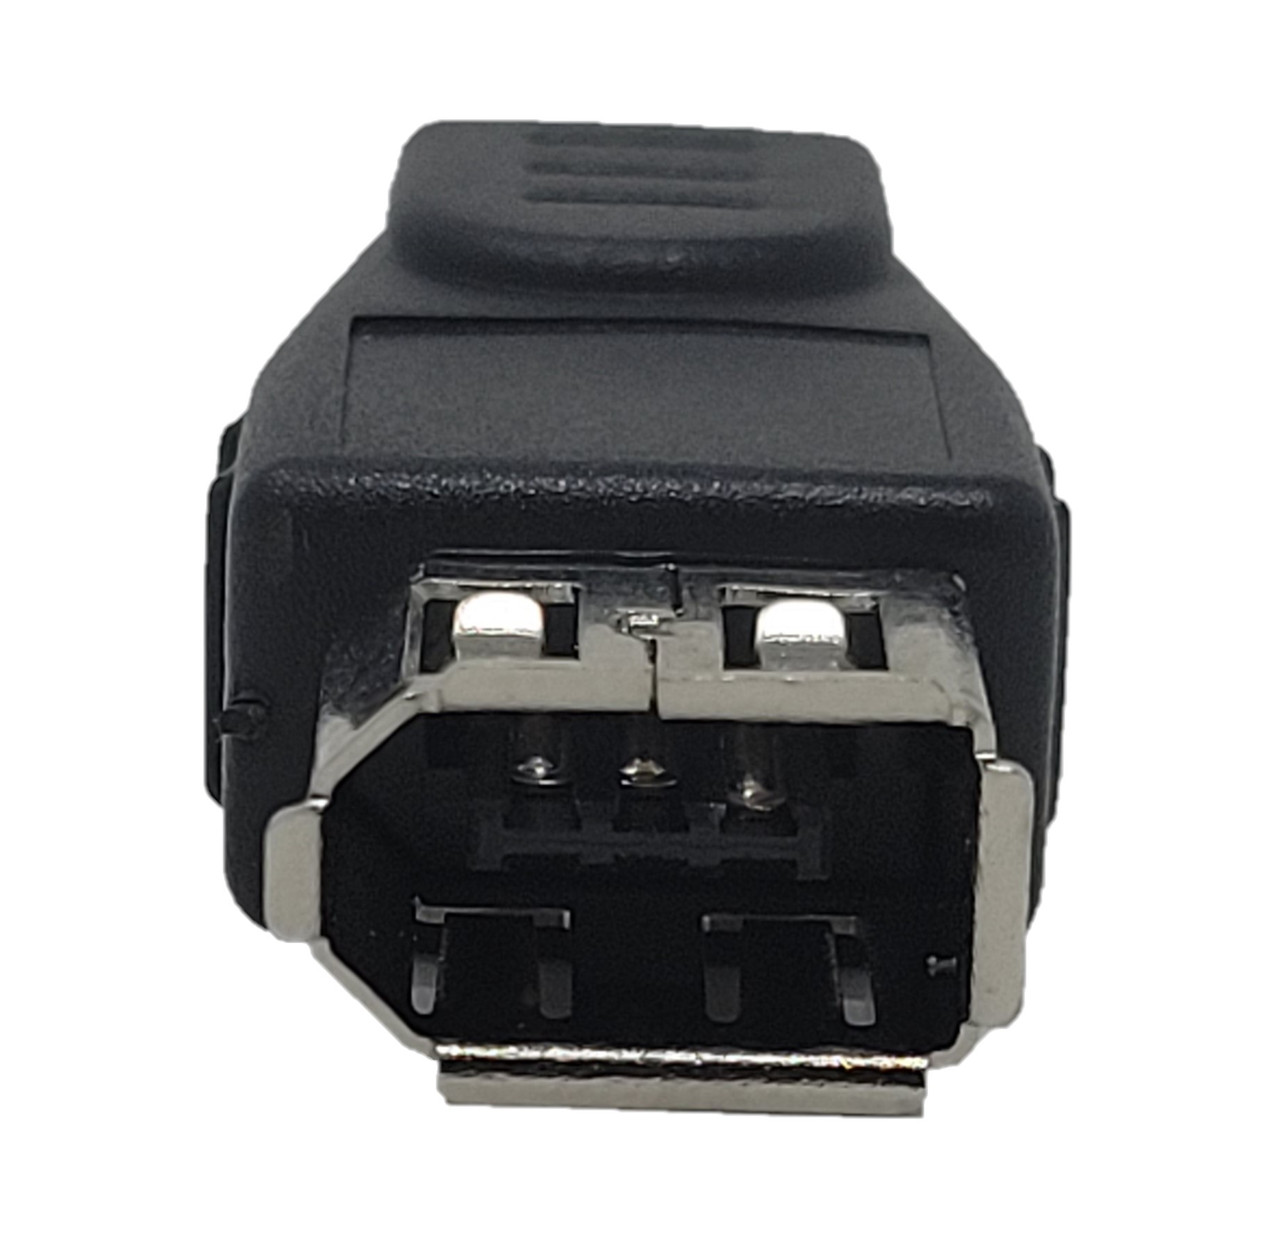 FireWire (IEEE 1394a) 6-Pin Female to 4-Pin Male Adapter